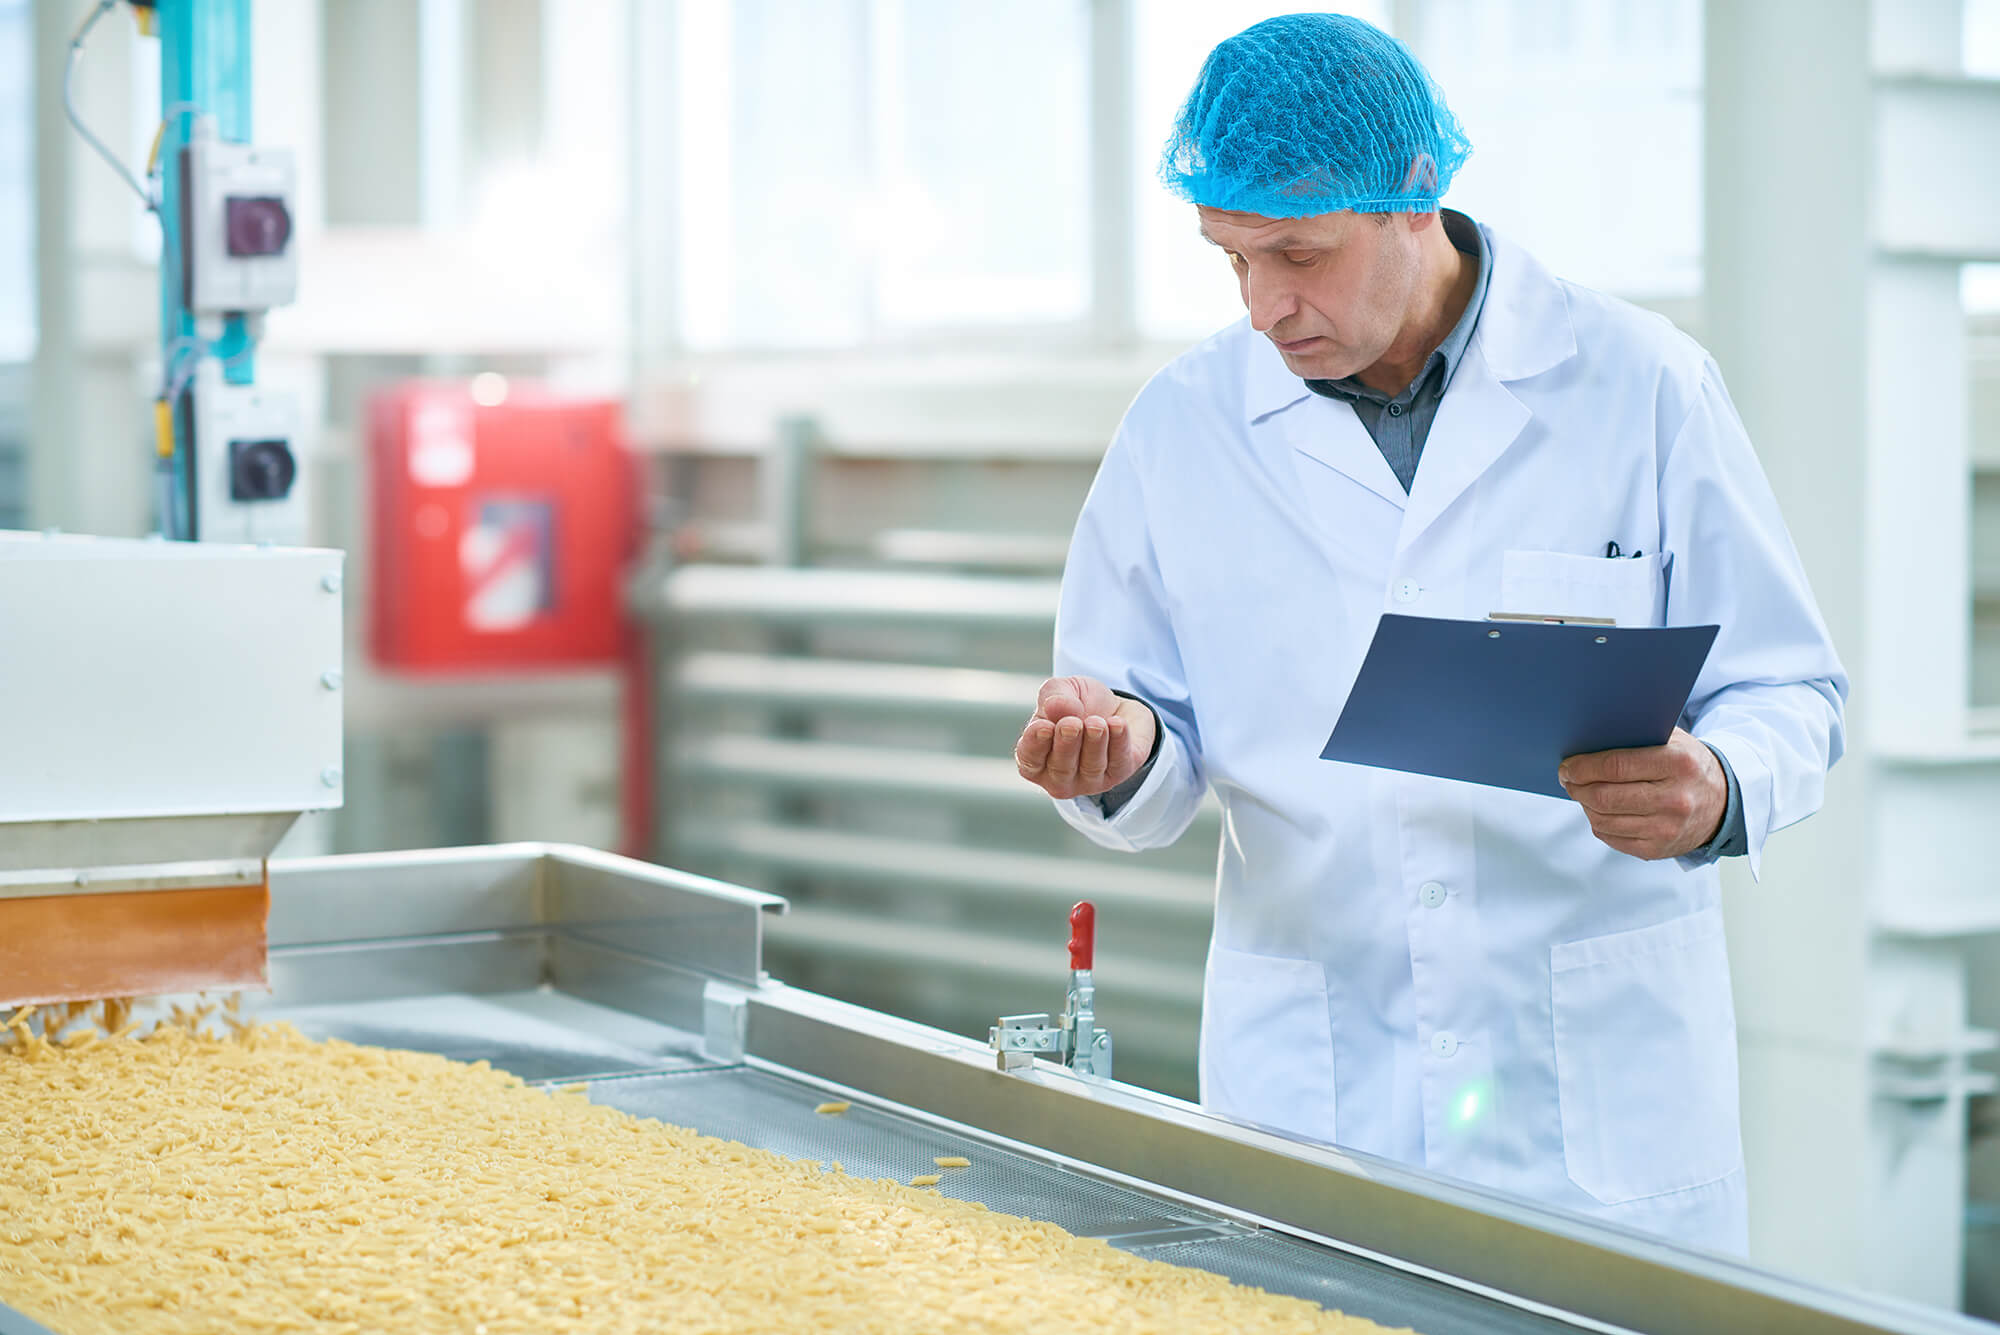 Man with clipboard inspecting food on manufacturing line